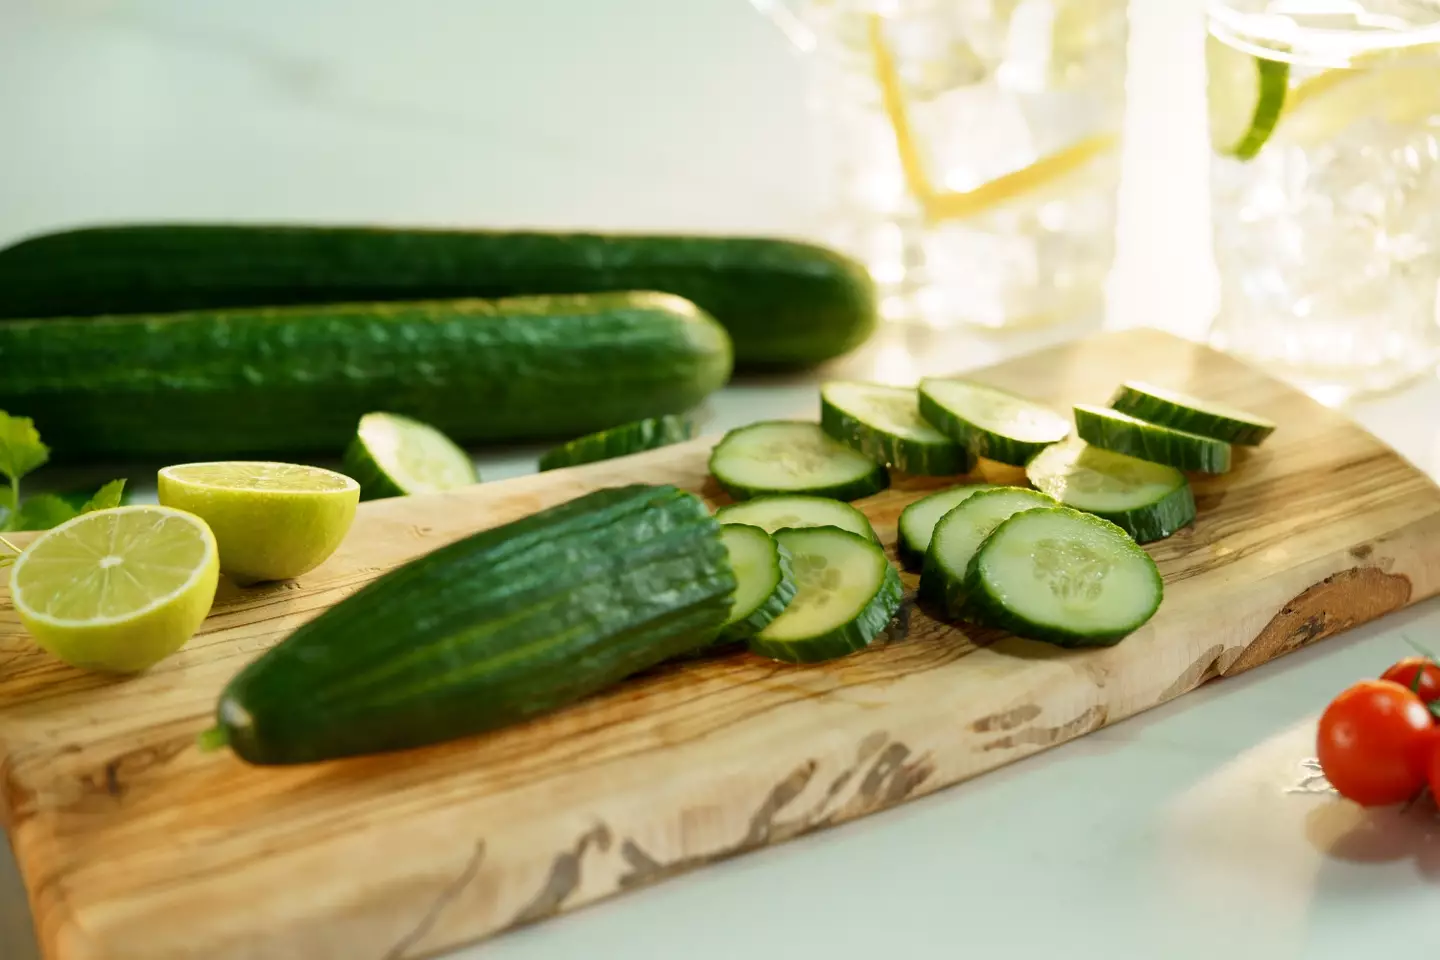 The whiff of cucumbers apparently gets the ladies going.